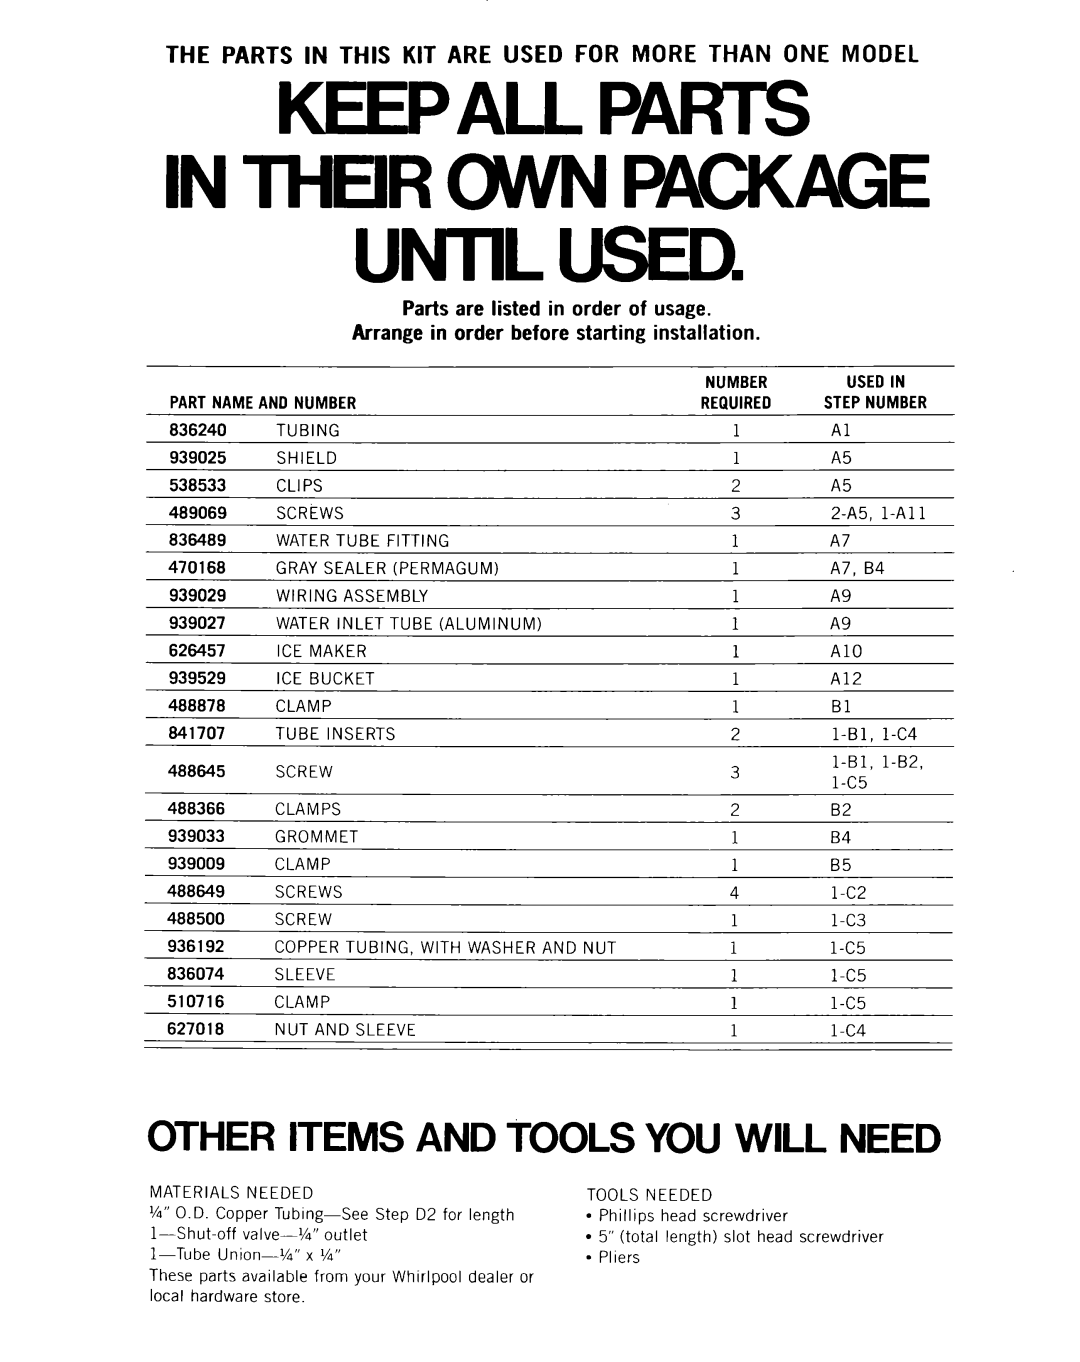 Whirlpool ECKMF-28 manual Other Items And Tools You Will Need, Keepall Parts In Theirwvn Package Until Used 